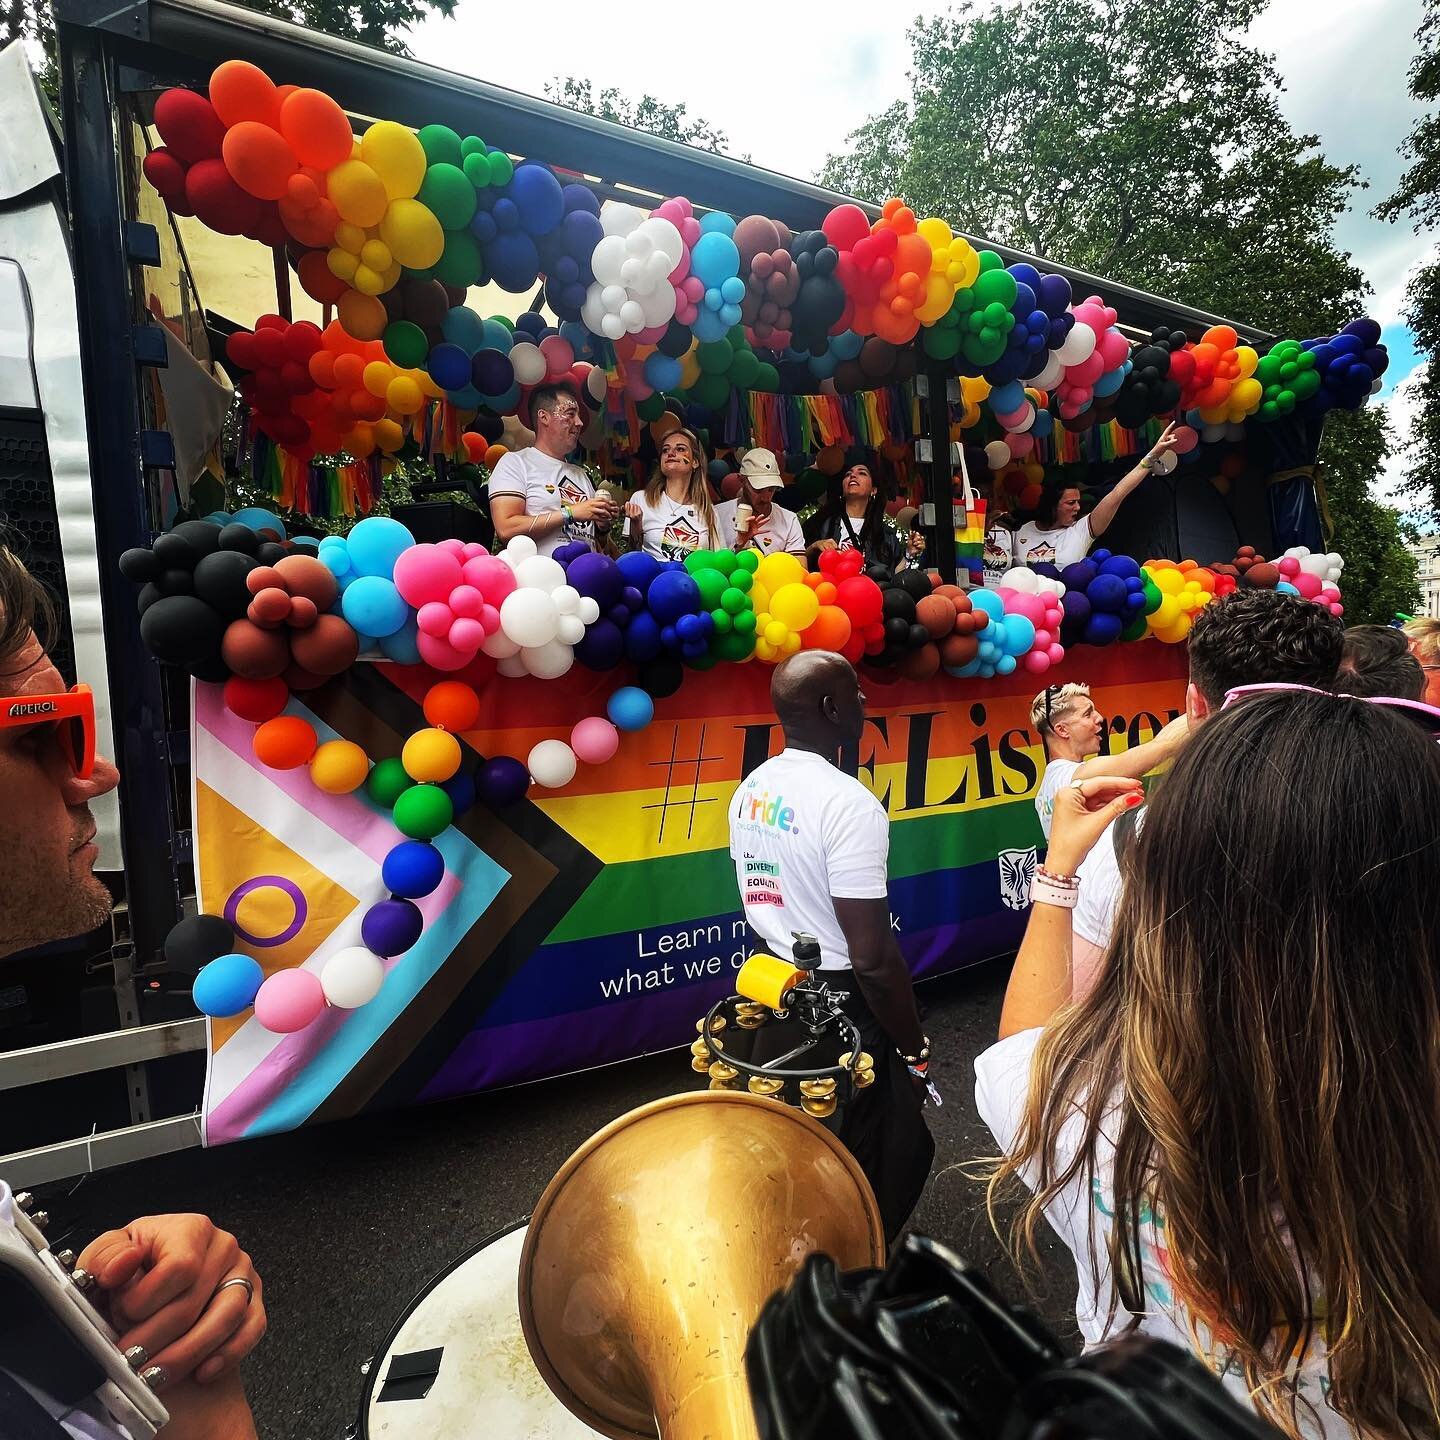 Great fun playing for the Pride parade on Sat with some @hackneycolliery buddies. Such a joyful event, and an honour to be there as an ally for my #lgbtq buddies. 

Think we were the only live musicians there on the day (at least I didn&rsquo;t see a